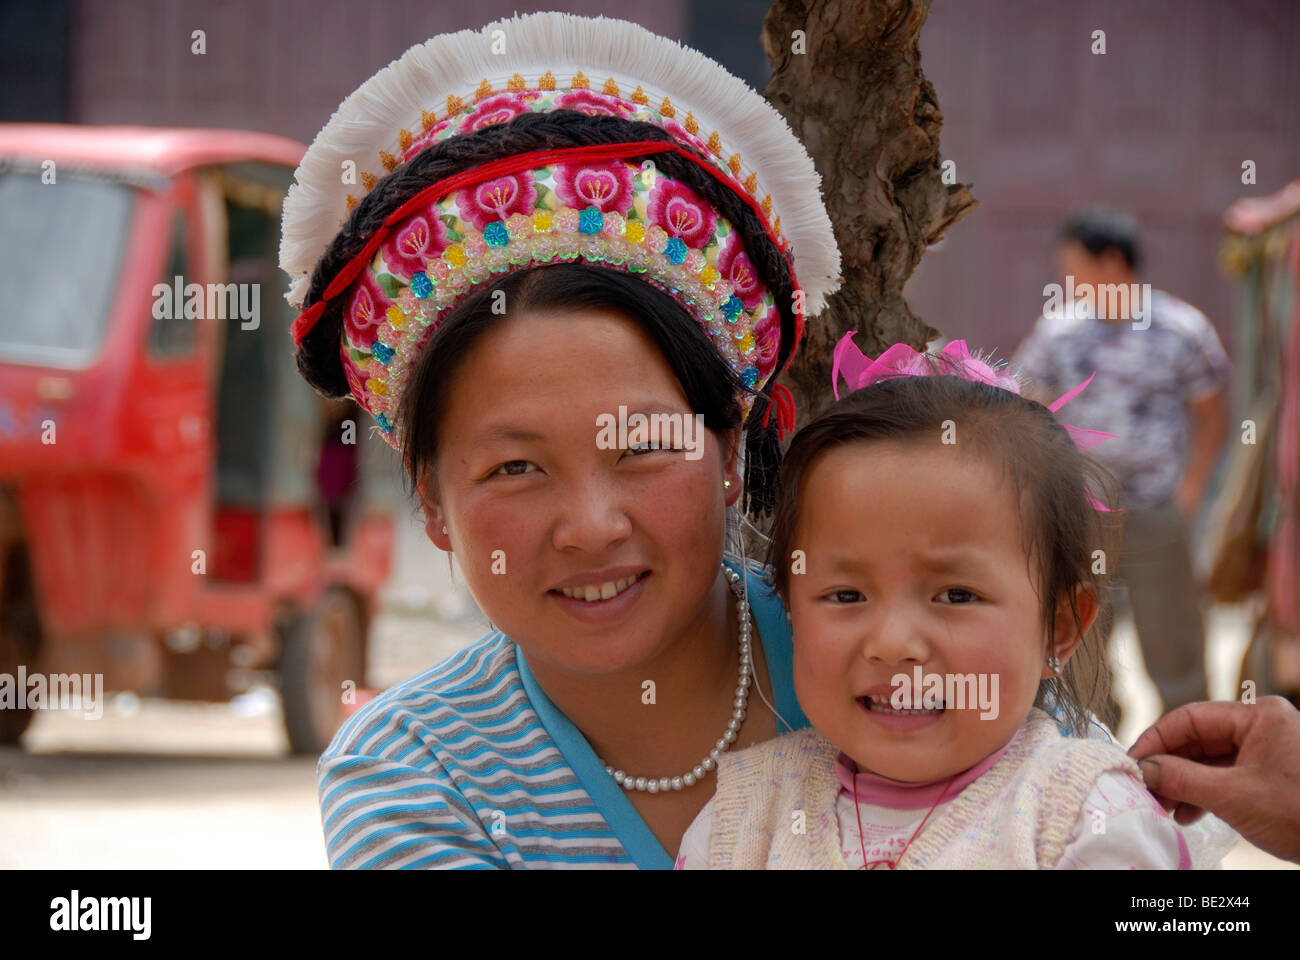 Portrait, ethnology, woman of the Bai ethnic group with typical head-dress and a toddler, Yongning, Lugu Hu Lake area, Yunnan P Stock Photo